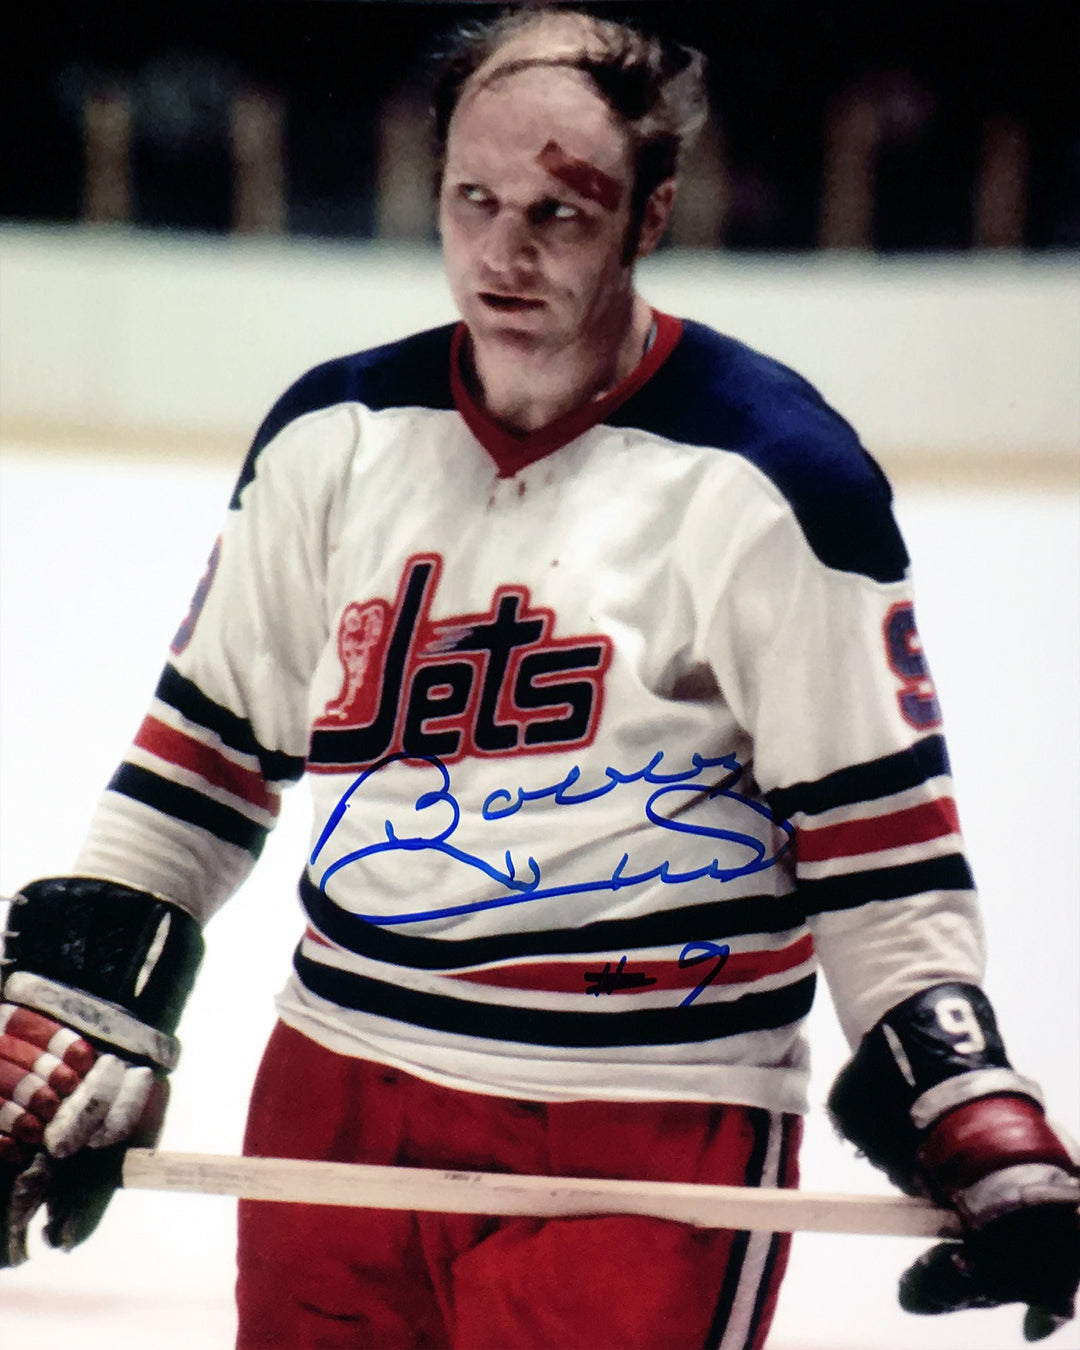 Bobby Hull Autographed 8X10 Photograph (Bloody) Winnipeg Jets, Winnipeg Jets, NHL, Hockey, Autographed, Signed, AAHPH31319